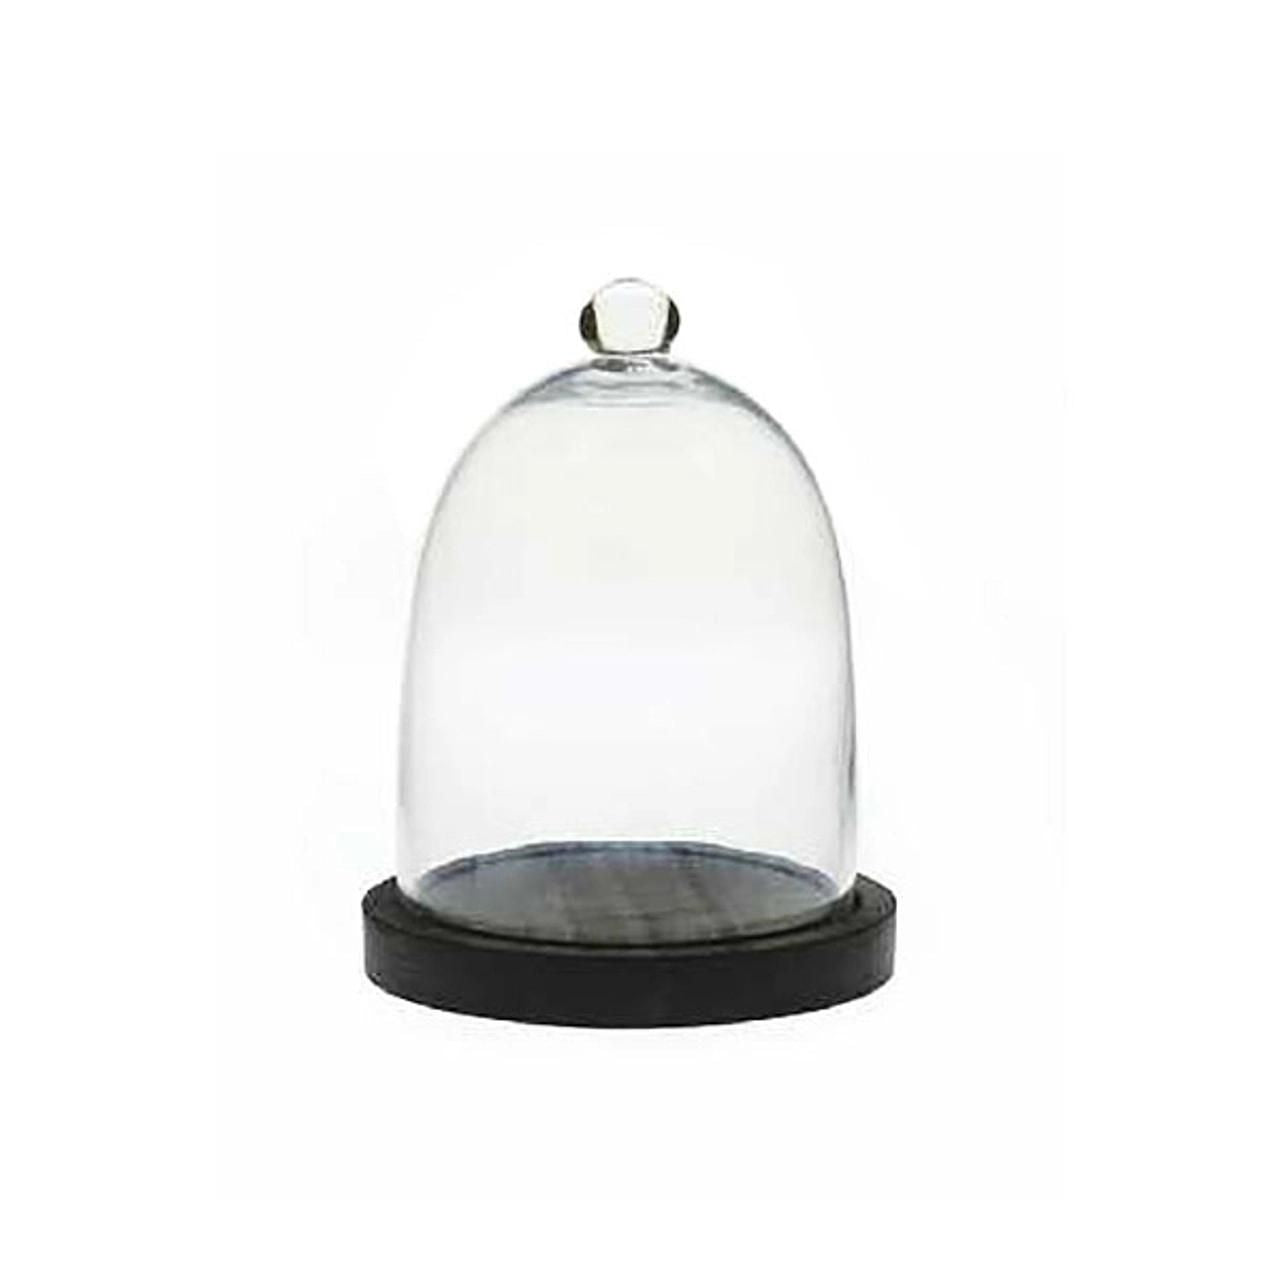 Cloche For Candles by Tipperary Crystal  Glass Cloche from Tipperary Crystal. Use this to decadently cover your candles or other tableware.